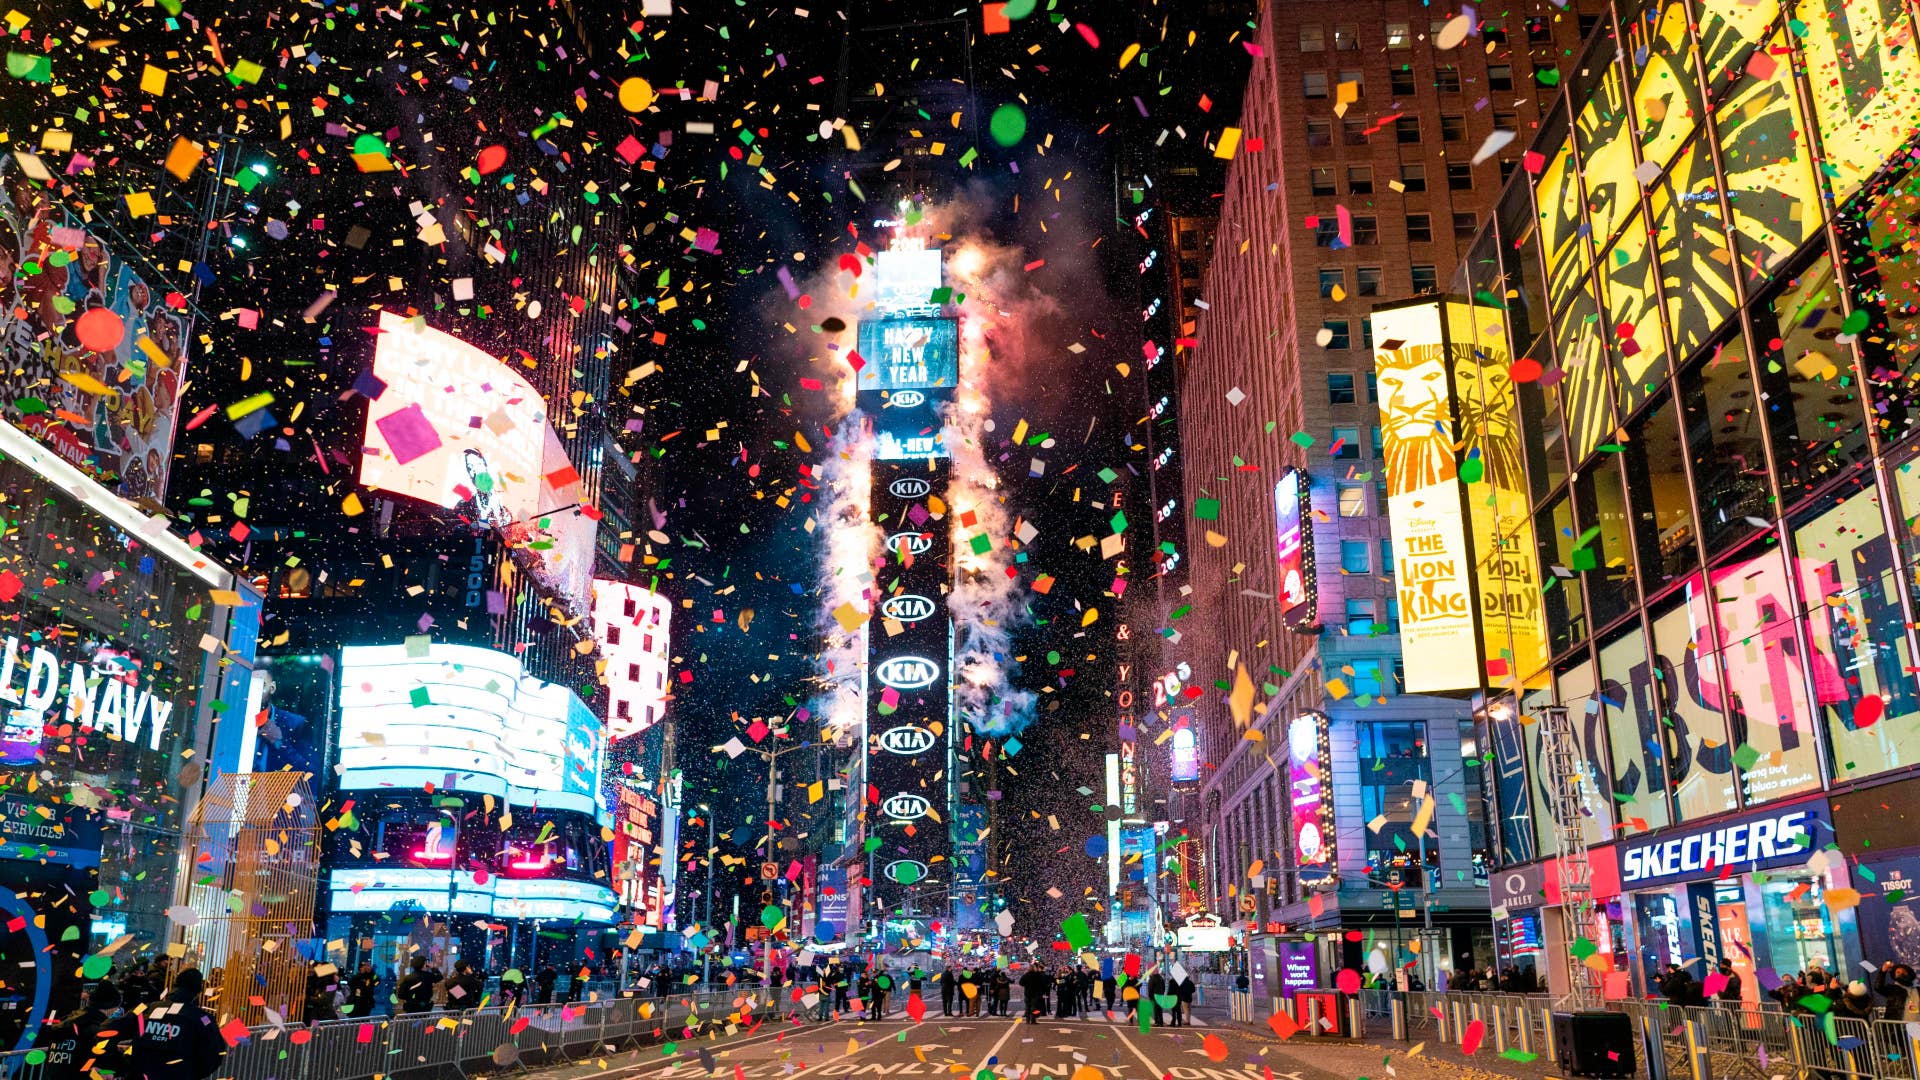 A New Year's Eve celebration in Times Square is shown.